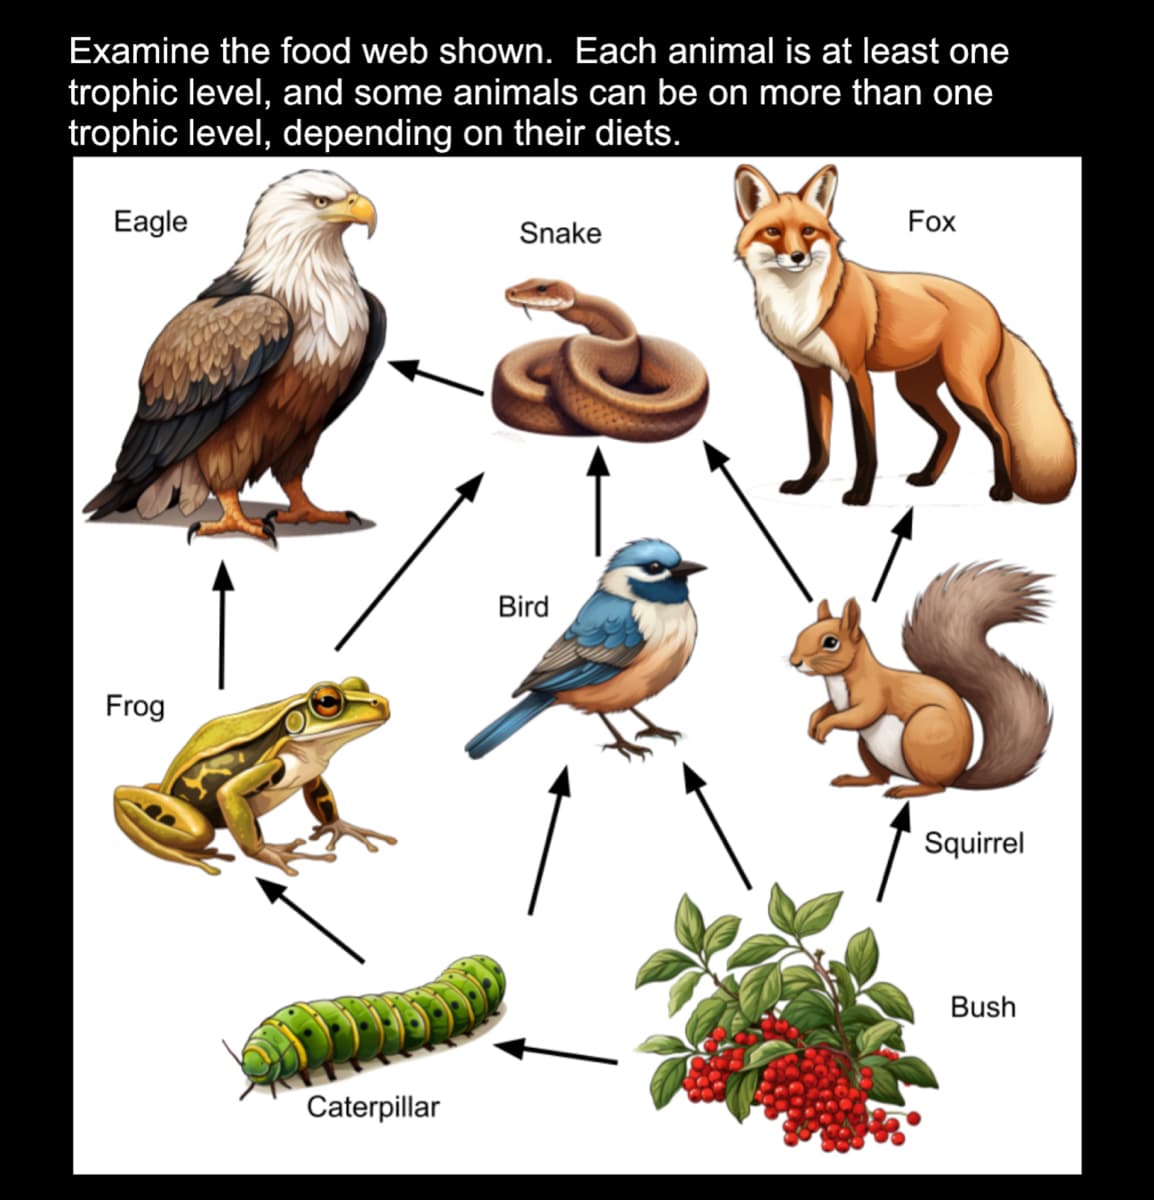 Examine the food web shown. Each animal is at least one
trophic level, and some animals can be on more than one
trophic level, depending on their diets.
Eagle
Frog
Caterpillar
Snake
Bird
Fox
JJS
Squirrel
Bush